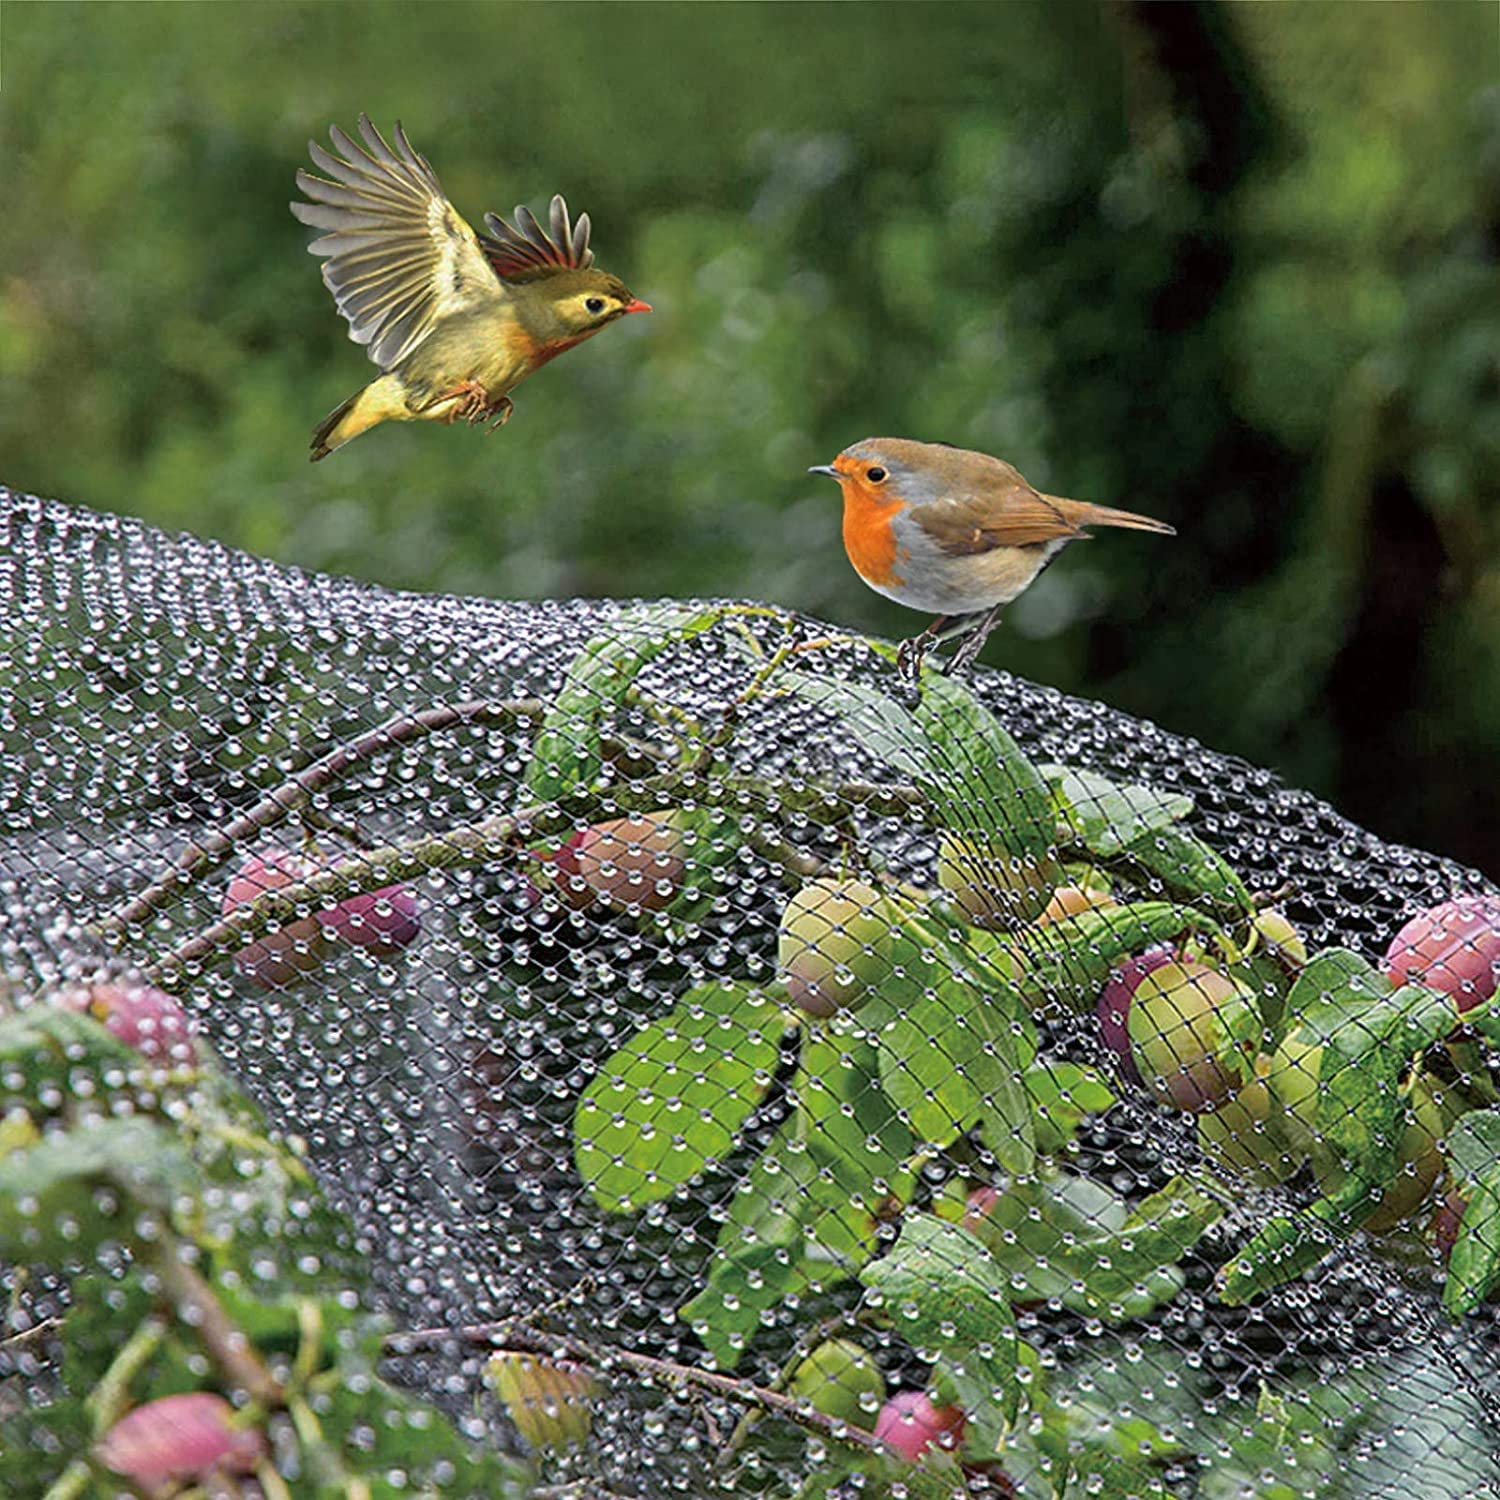 Deer or Other Animals HIKEP Garden Netting Kits Deer Fence Netting for Garden Protection Fruit Trees Vegetable Against Birds 50Pcs Garden Hoops Grow Tunnel 7x65Ft Bird Netting with 10 Sets 